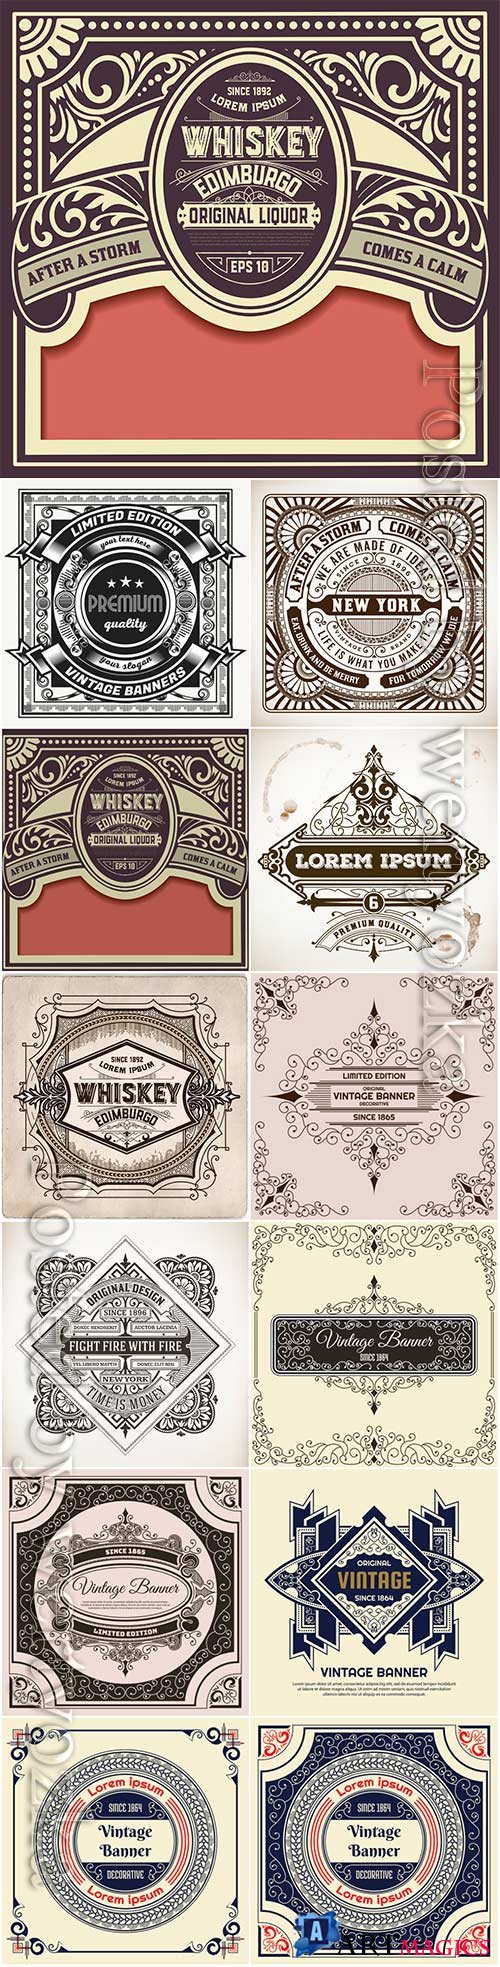 Labels in vintage style, vector elements